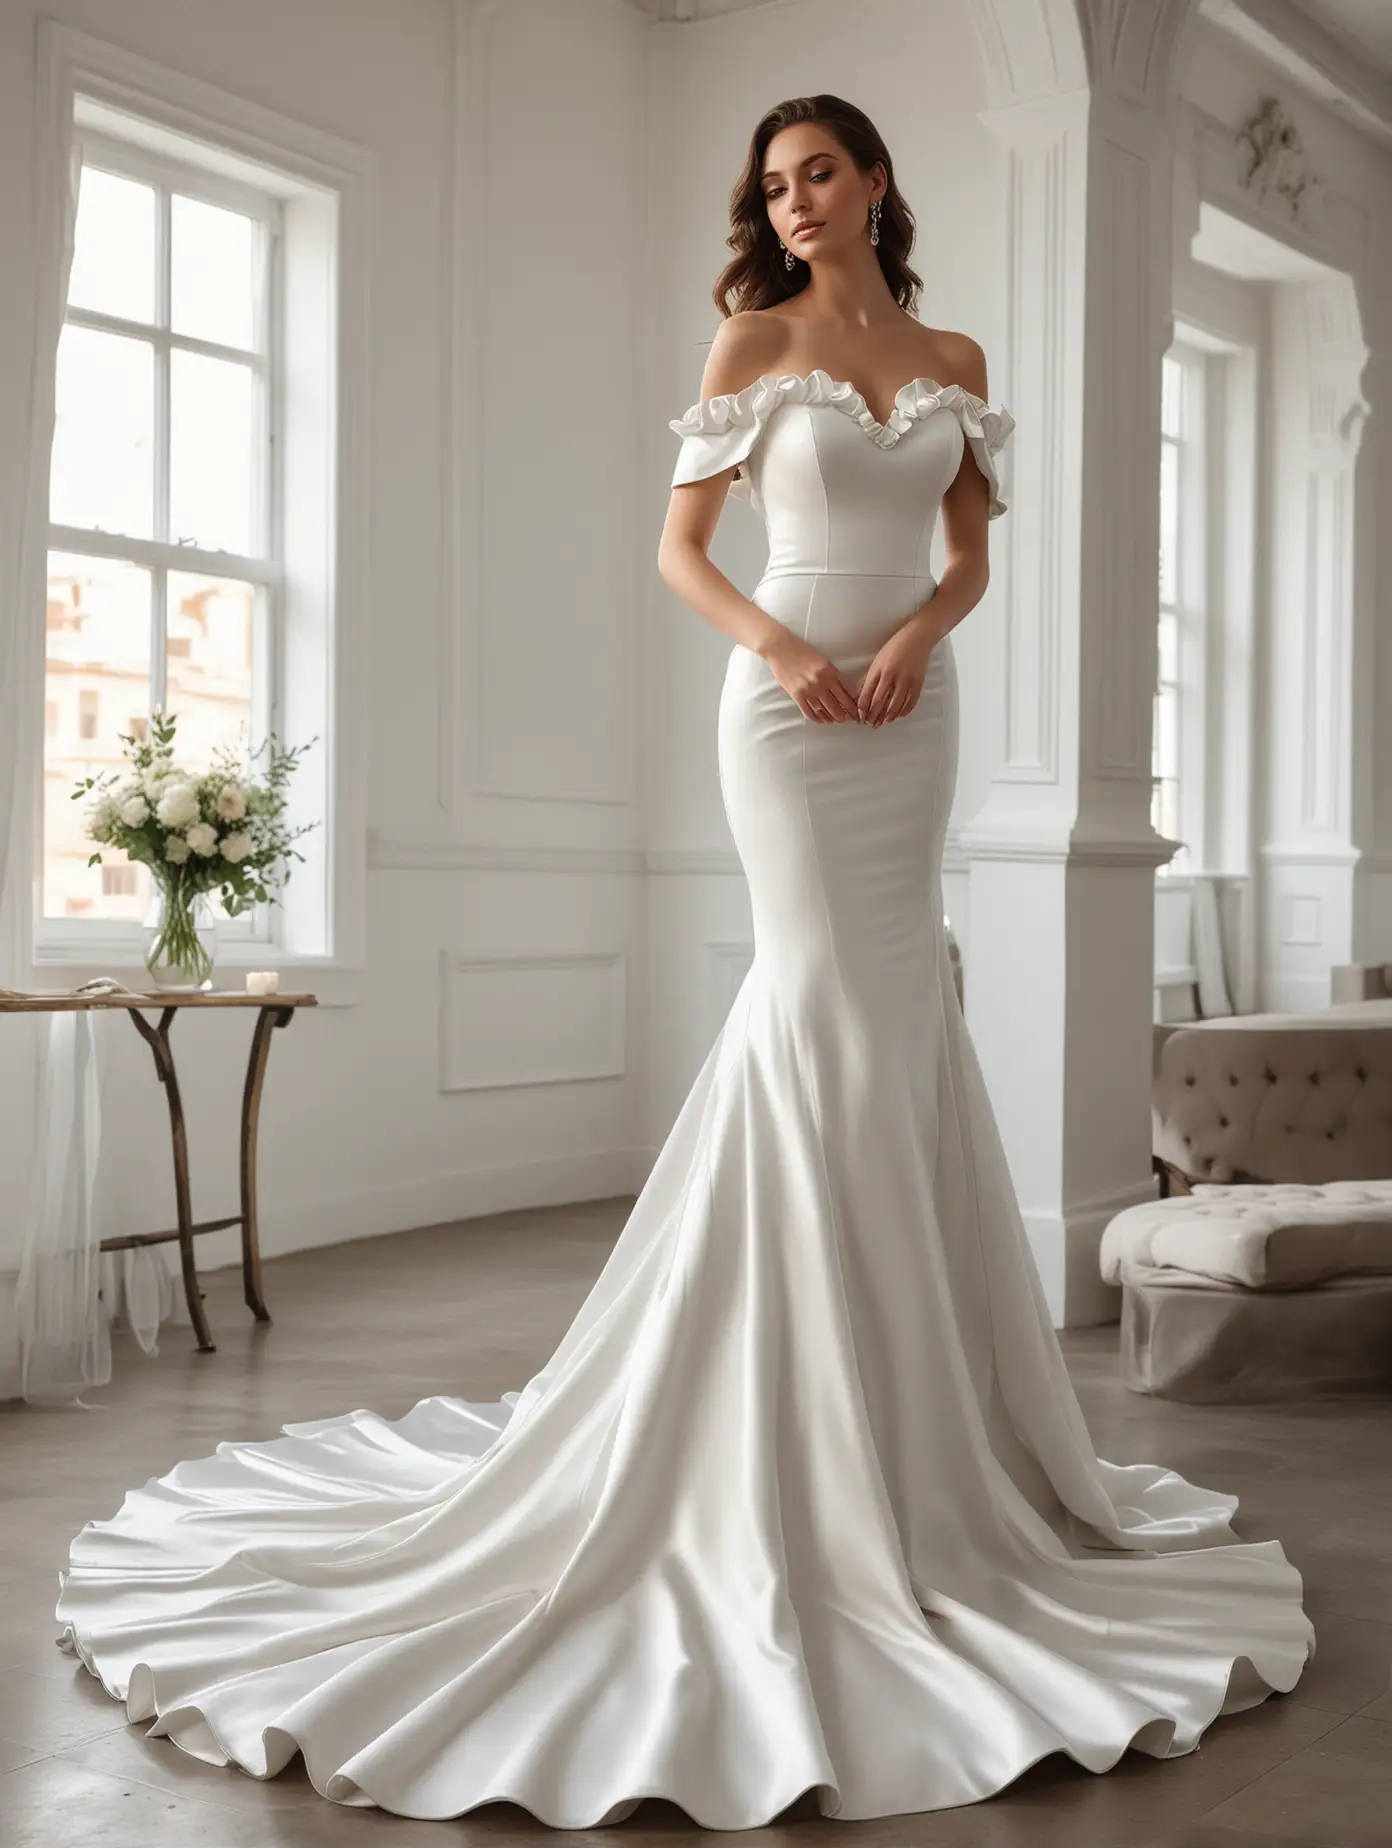 Elegant off-the-shoulder mermaid white satin wedding dress with ruffles on the shoulders and train. The simple design has no wrinkles in the fabric. It is featured in high resolution photography with high definition details, like a fashion magazine style photo shoot. A beautiful model is shown in a full body shot with natural lighting in an indoor setting with an elegant room background